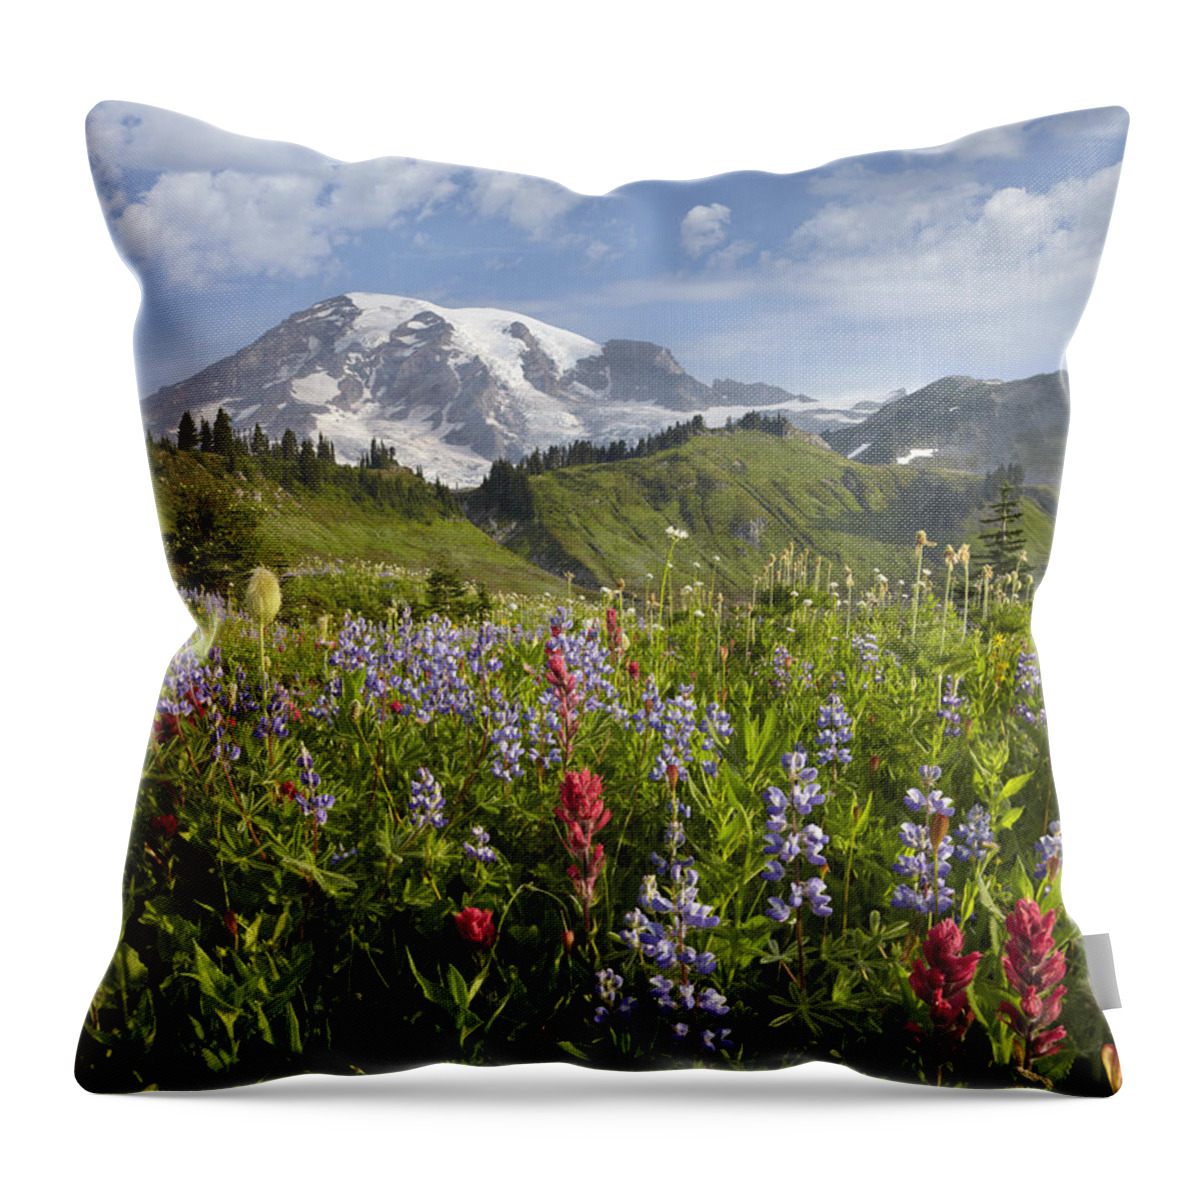 00437809 Throw Pillow featuring the photograph Paradise Meadow And Mount Rainier Mount by Tim Fitzharris